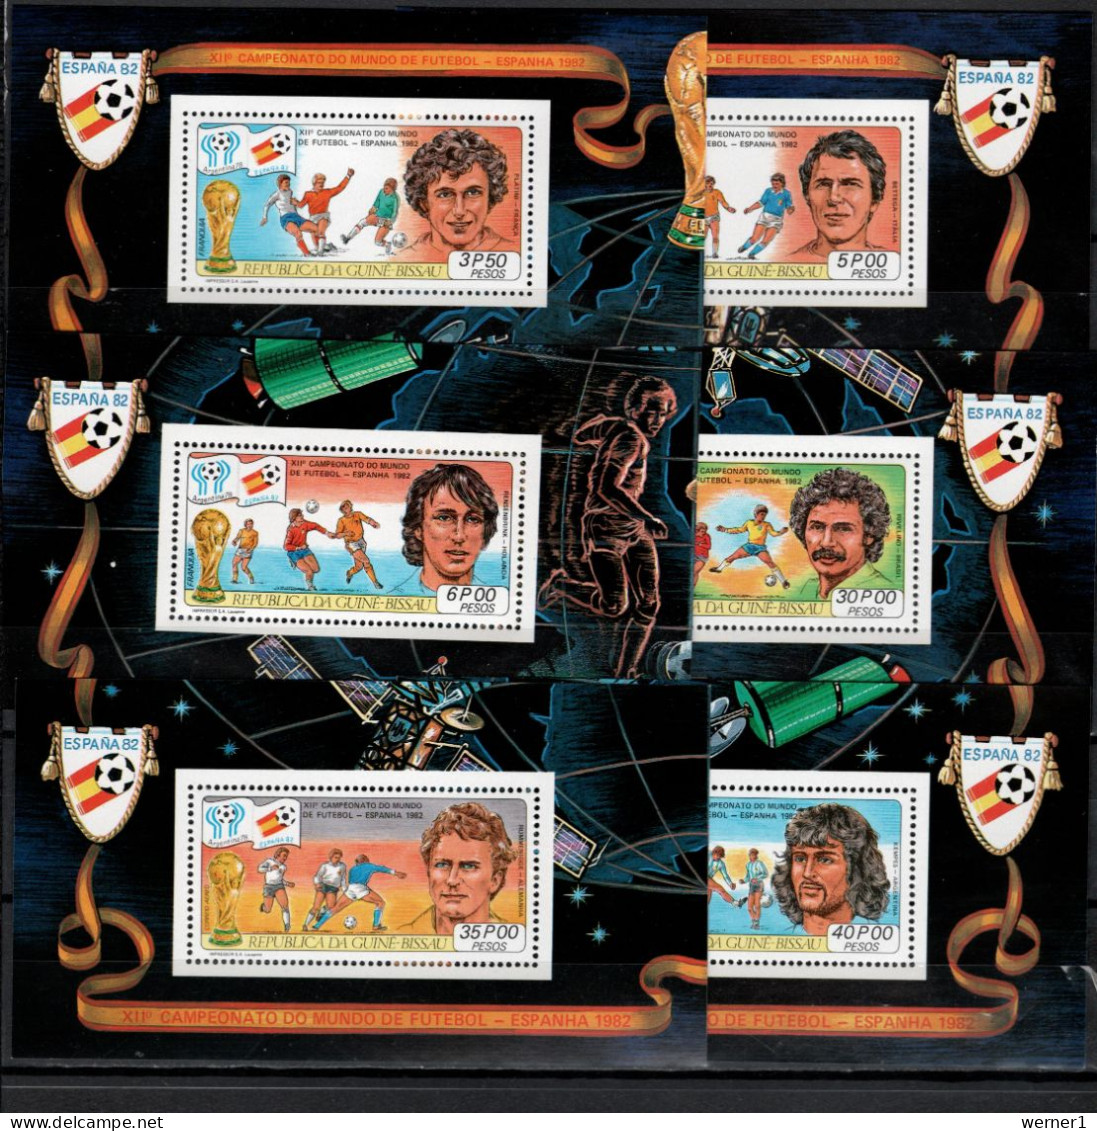 Guinea - Bissau 1981 Football Soccer World Cup, Space Set Of 6 S/s MNH -scarce- - 1982 – Espagne